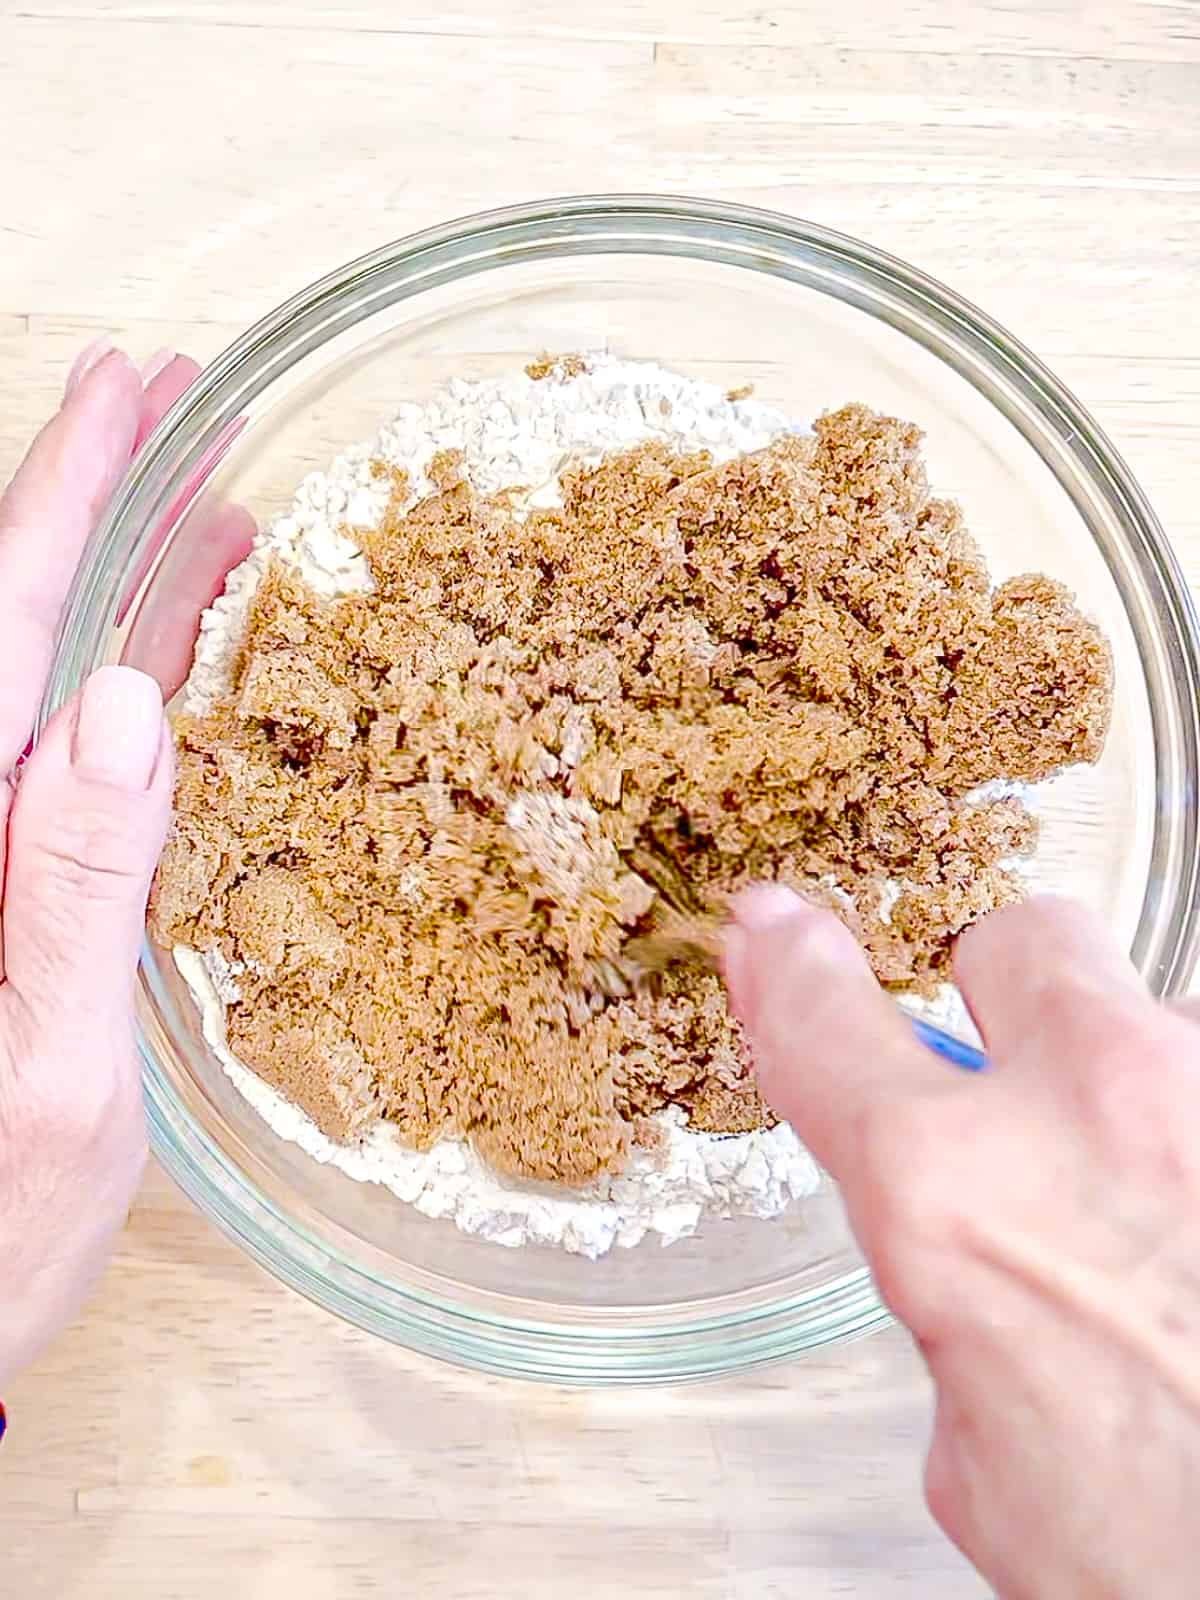 Using a fork to mix dry ingredients to make streusel topping.